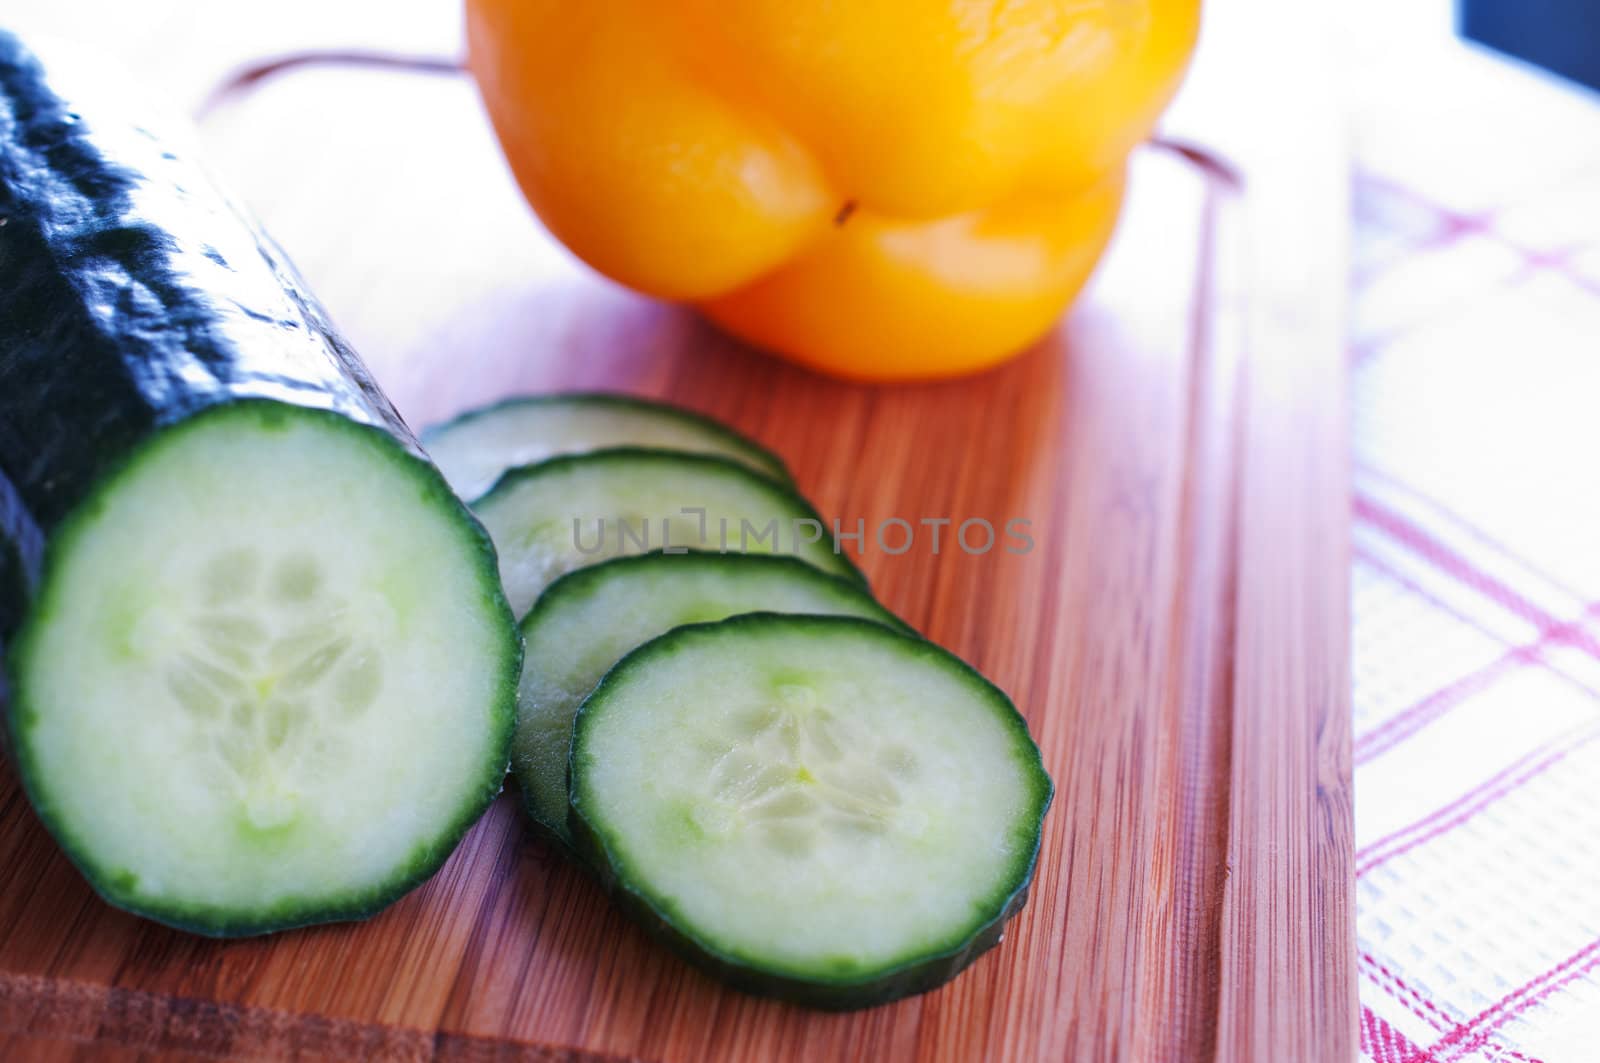 Cucumber and sweet yellow peppers on a wooden board